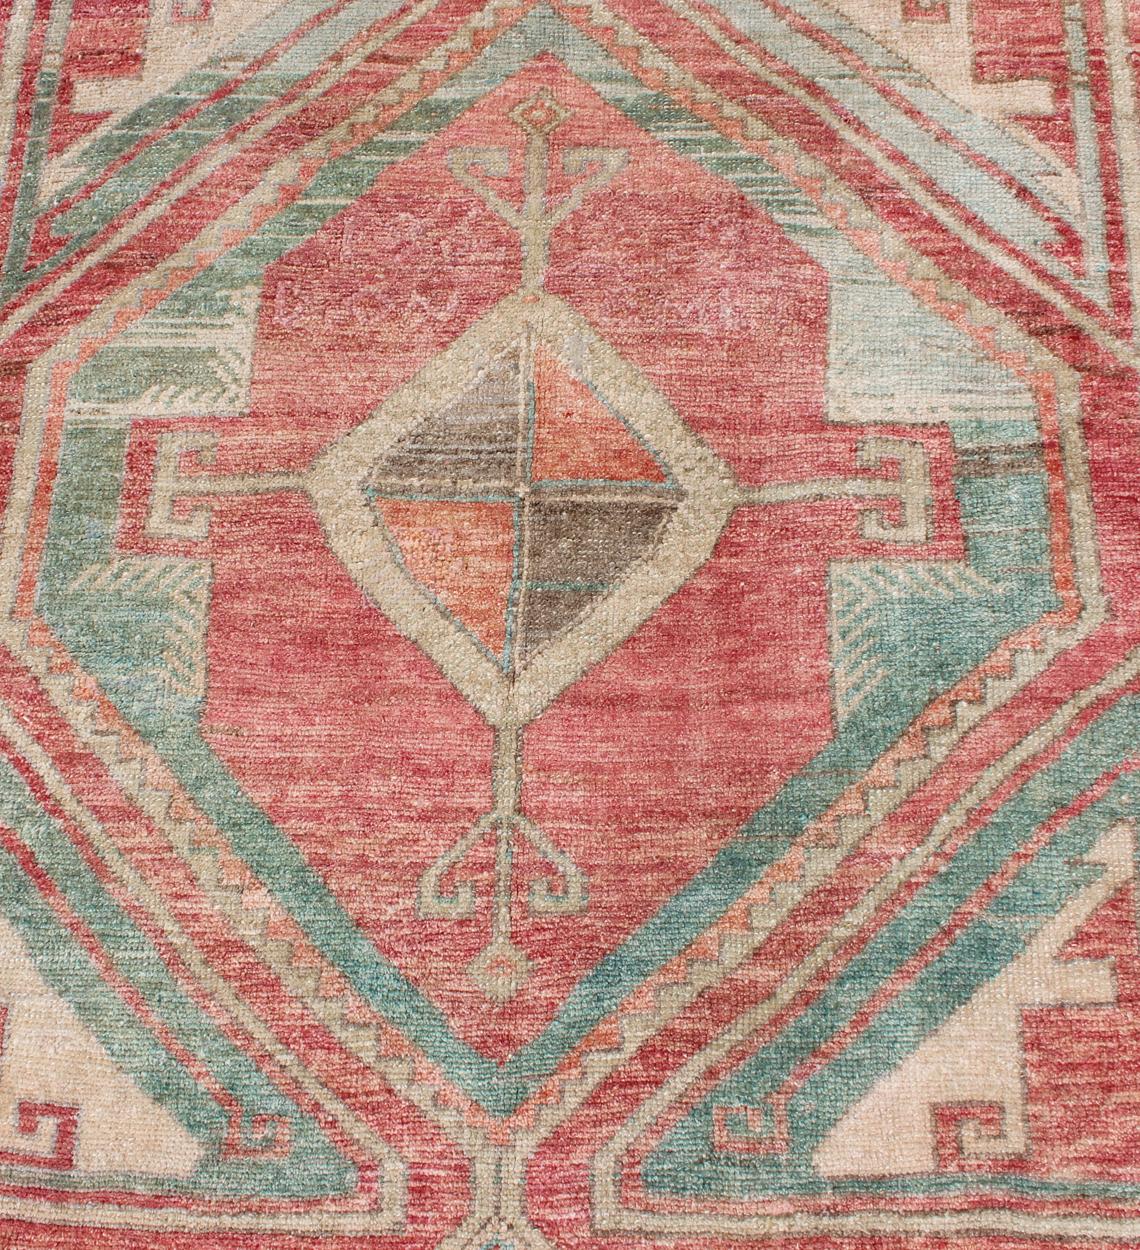 Vintage Oushak Runner in Aqua and Soft, Rosy Red For Sale 1